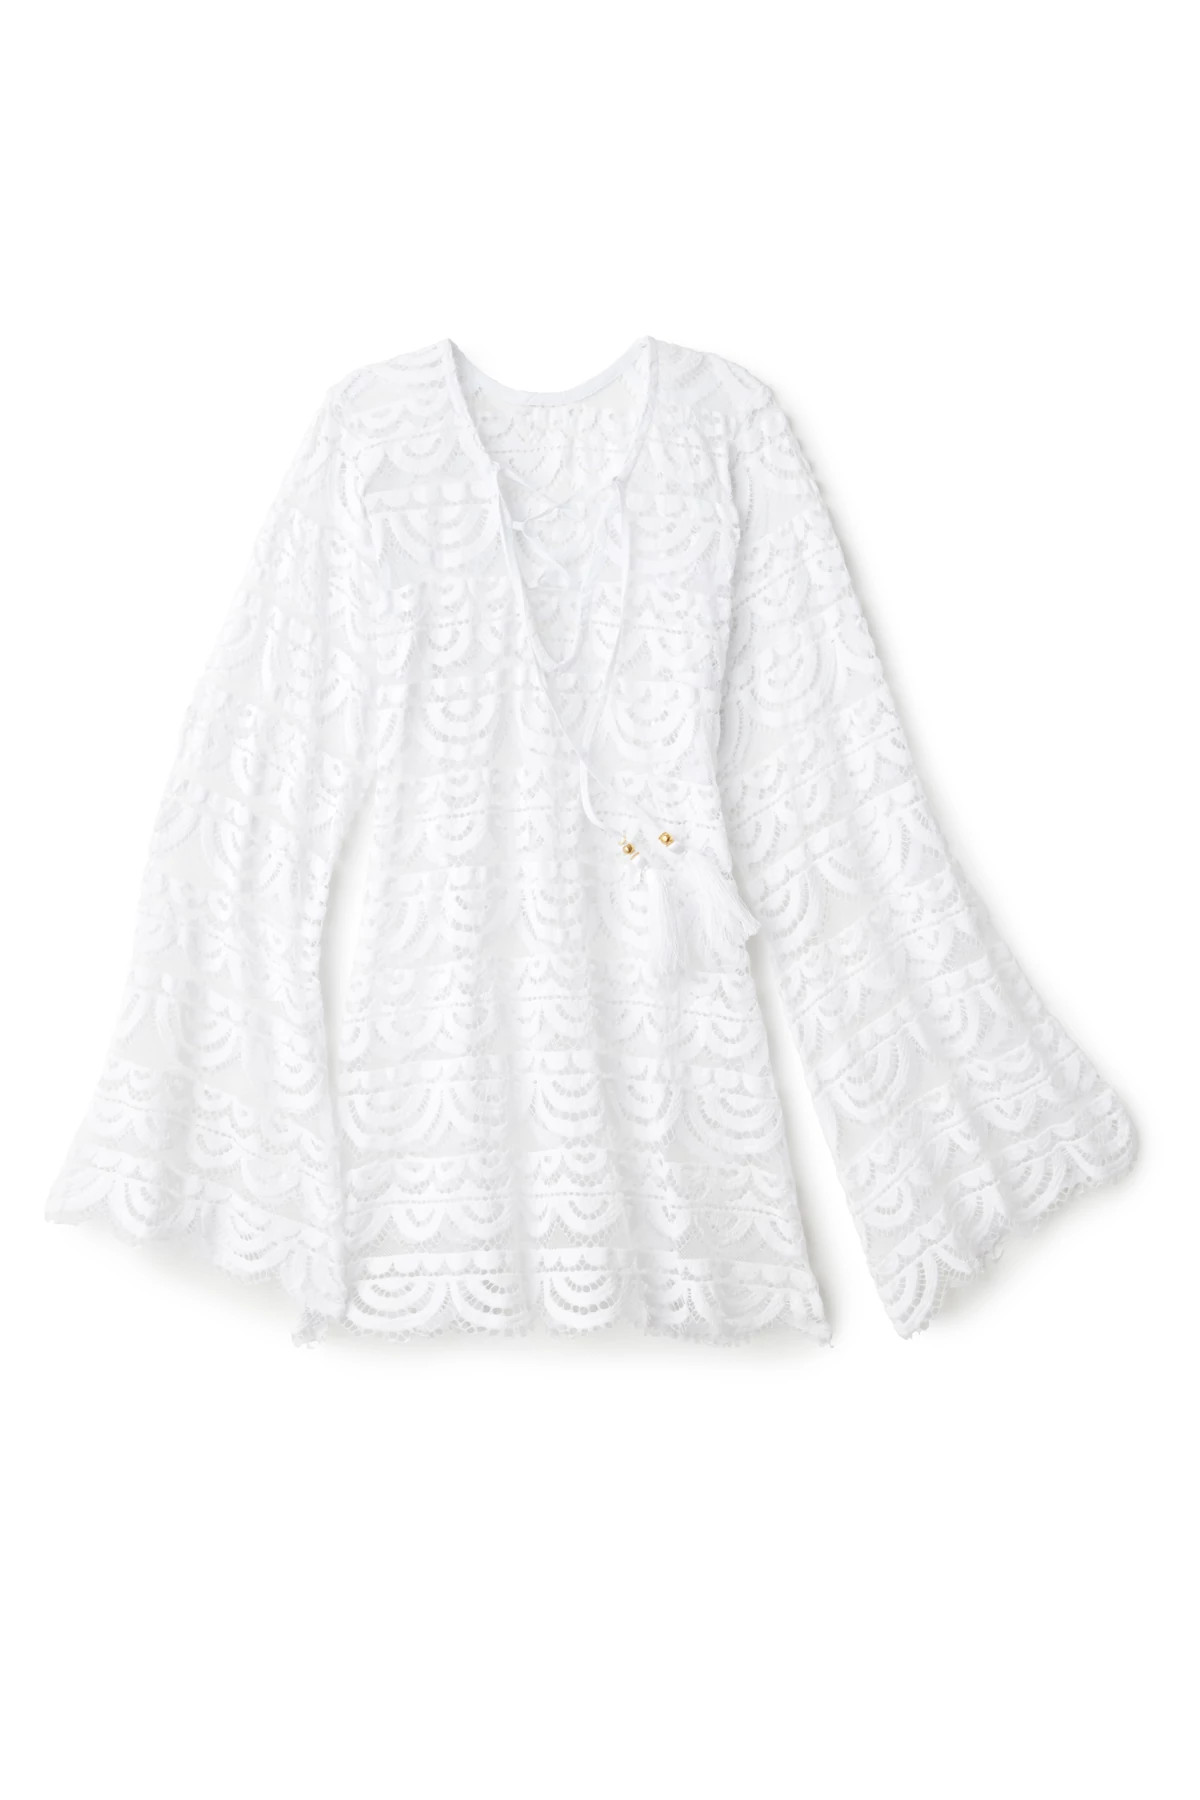 WATER LILY Noah Crochet Lace-Up Tunic image number 3